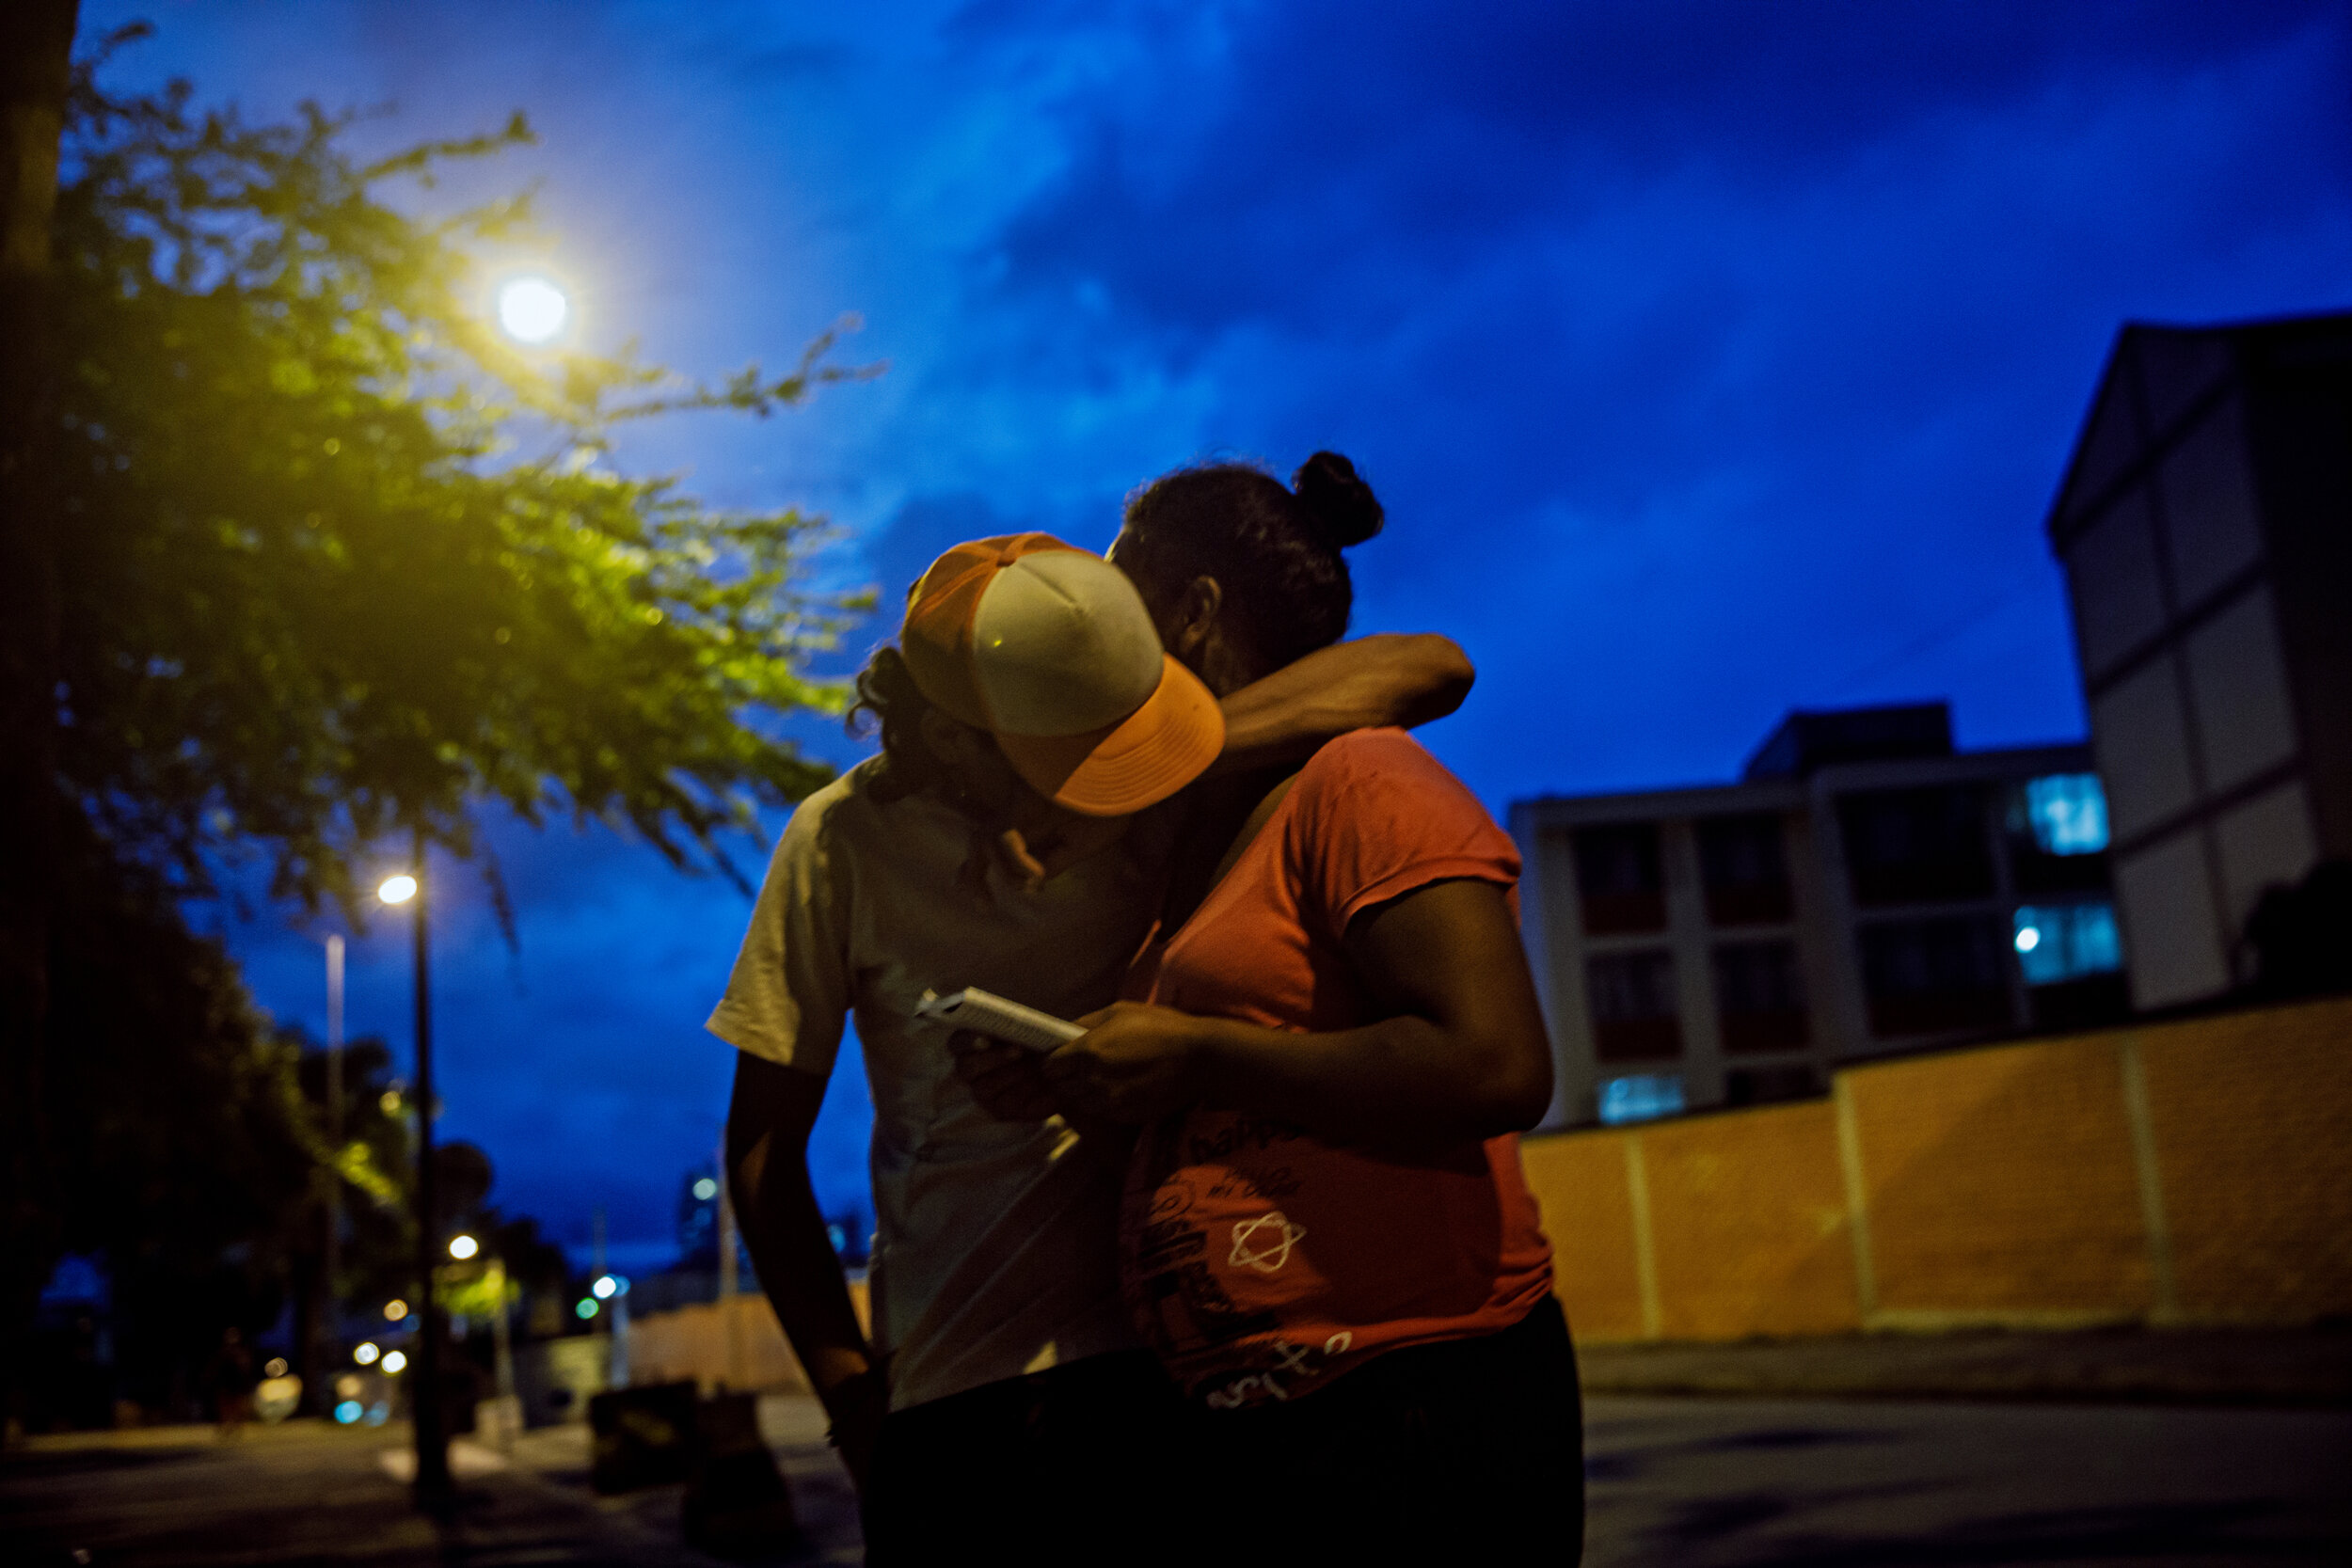  Jason Figeroa hugs his wife Herminda Flores, who is also 6 month pregnant, as they take shelter at a city park after finishing a multi-day journey on foot from Cucuta to Bucaramanga, Colombia. The couple, along with their 4-year-old son were robbed 